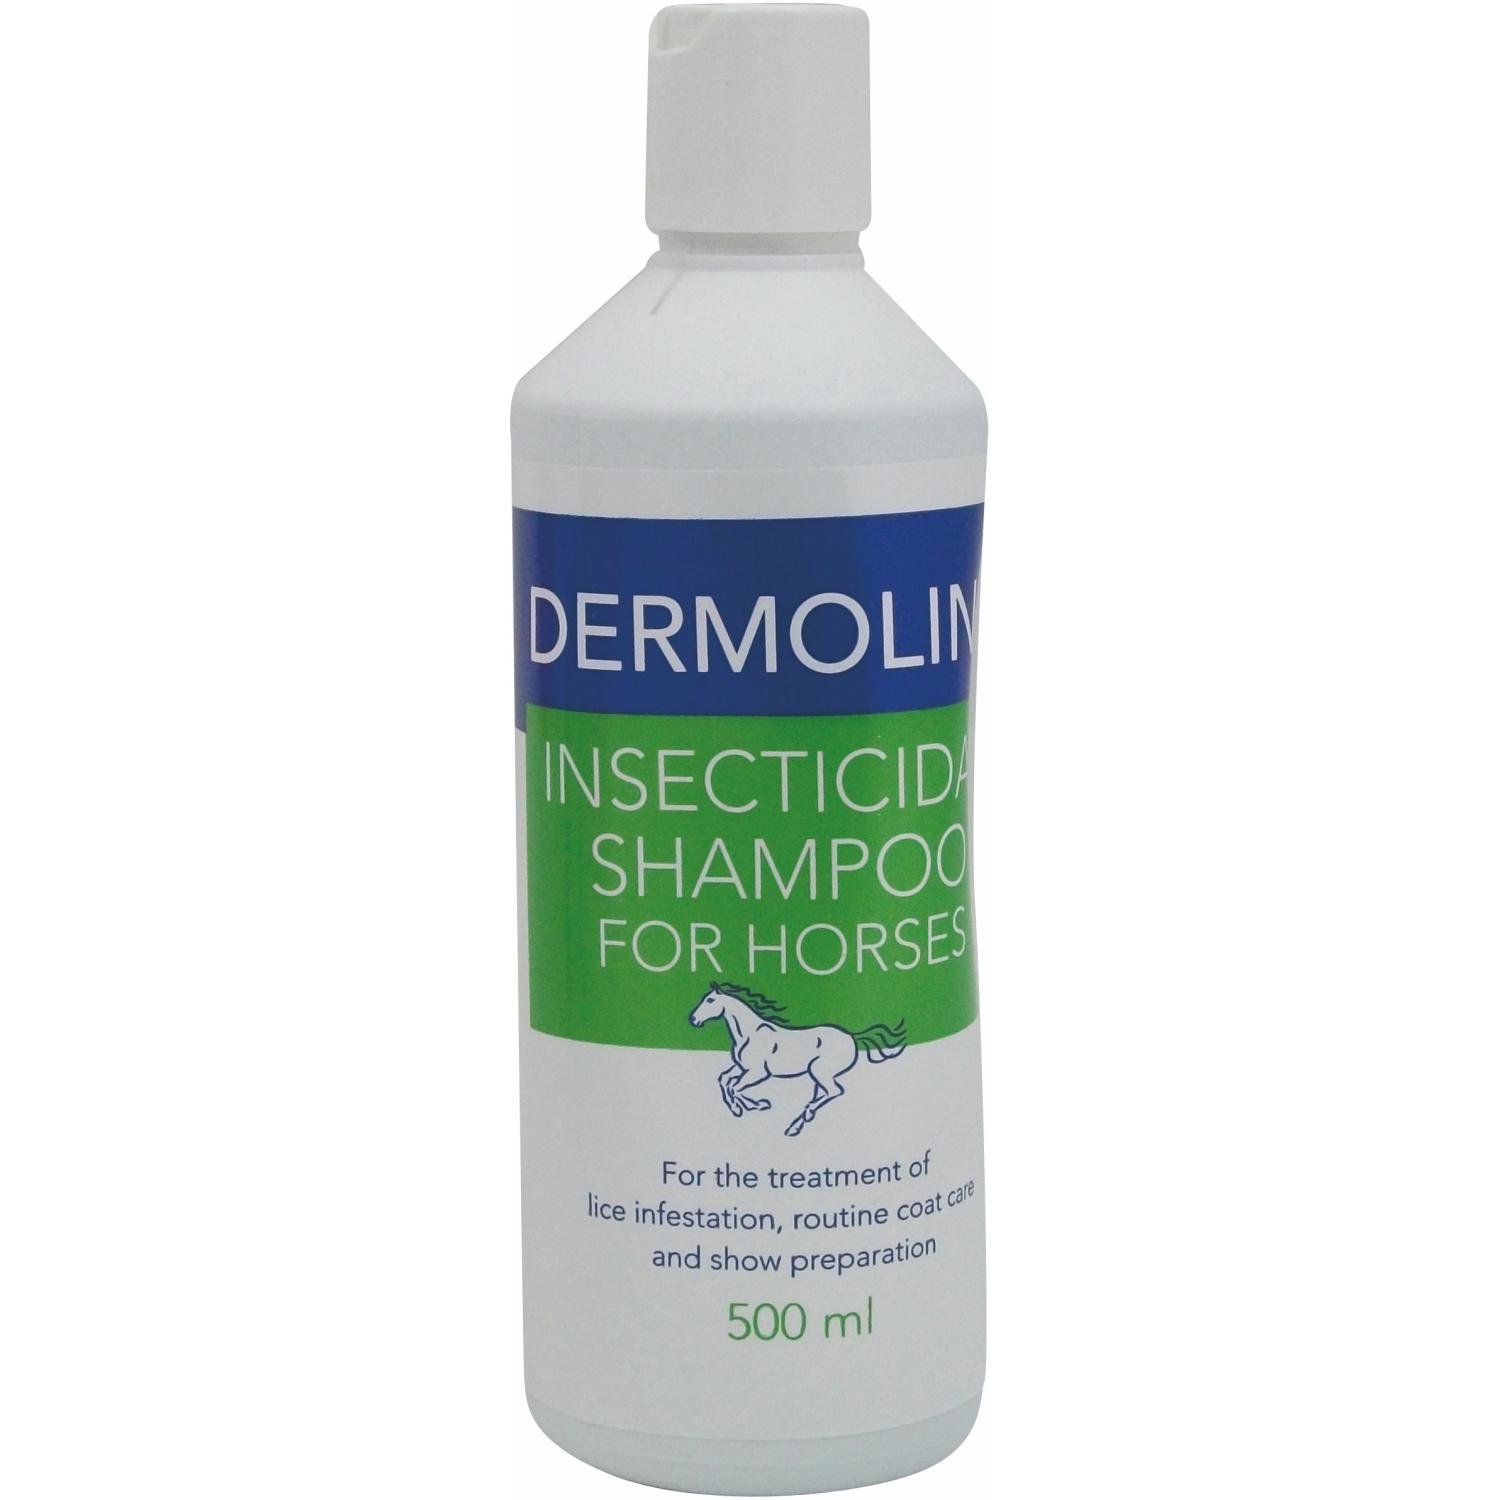 Dermonline Insect Shampoo For Horses